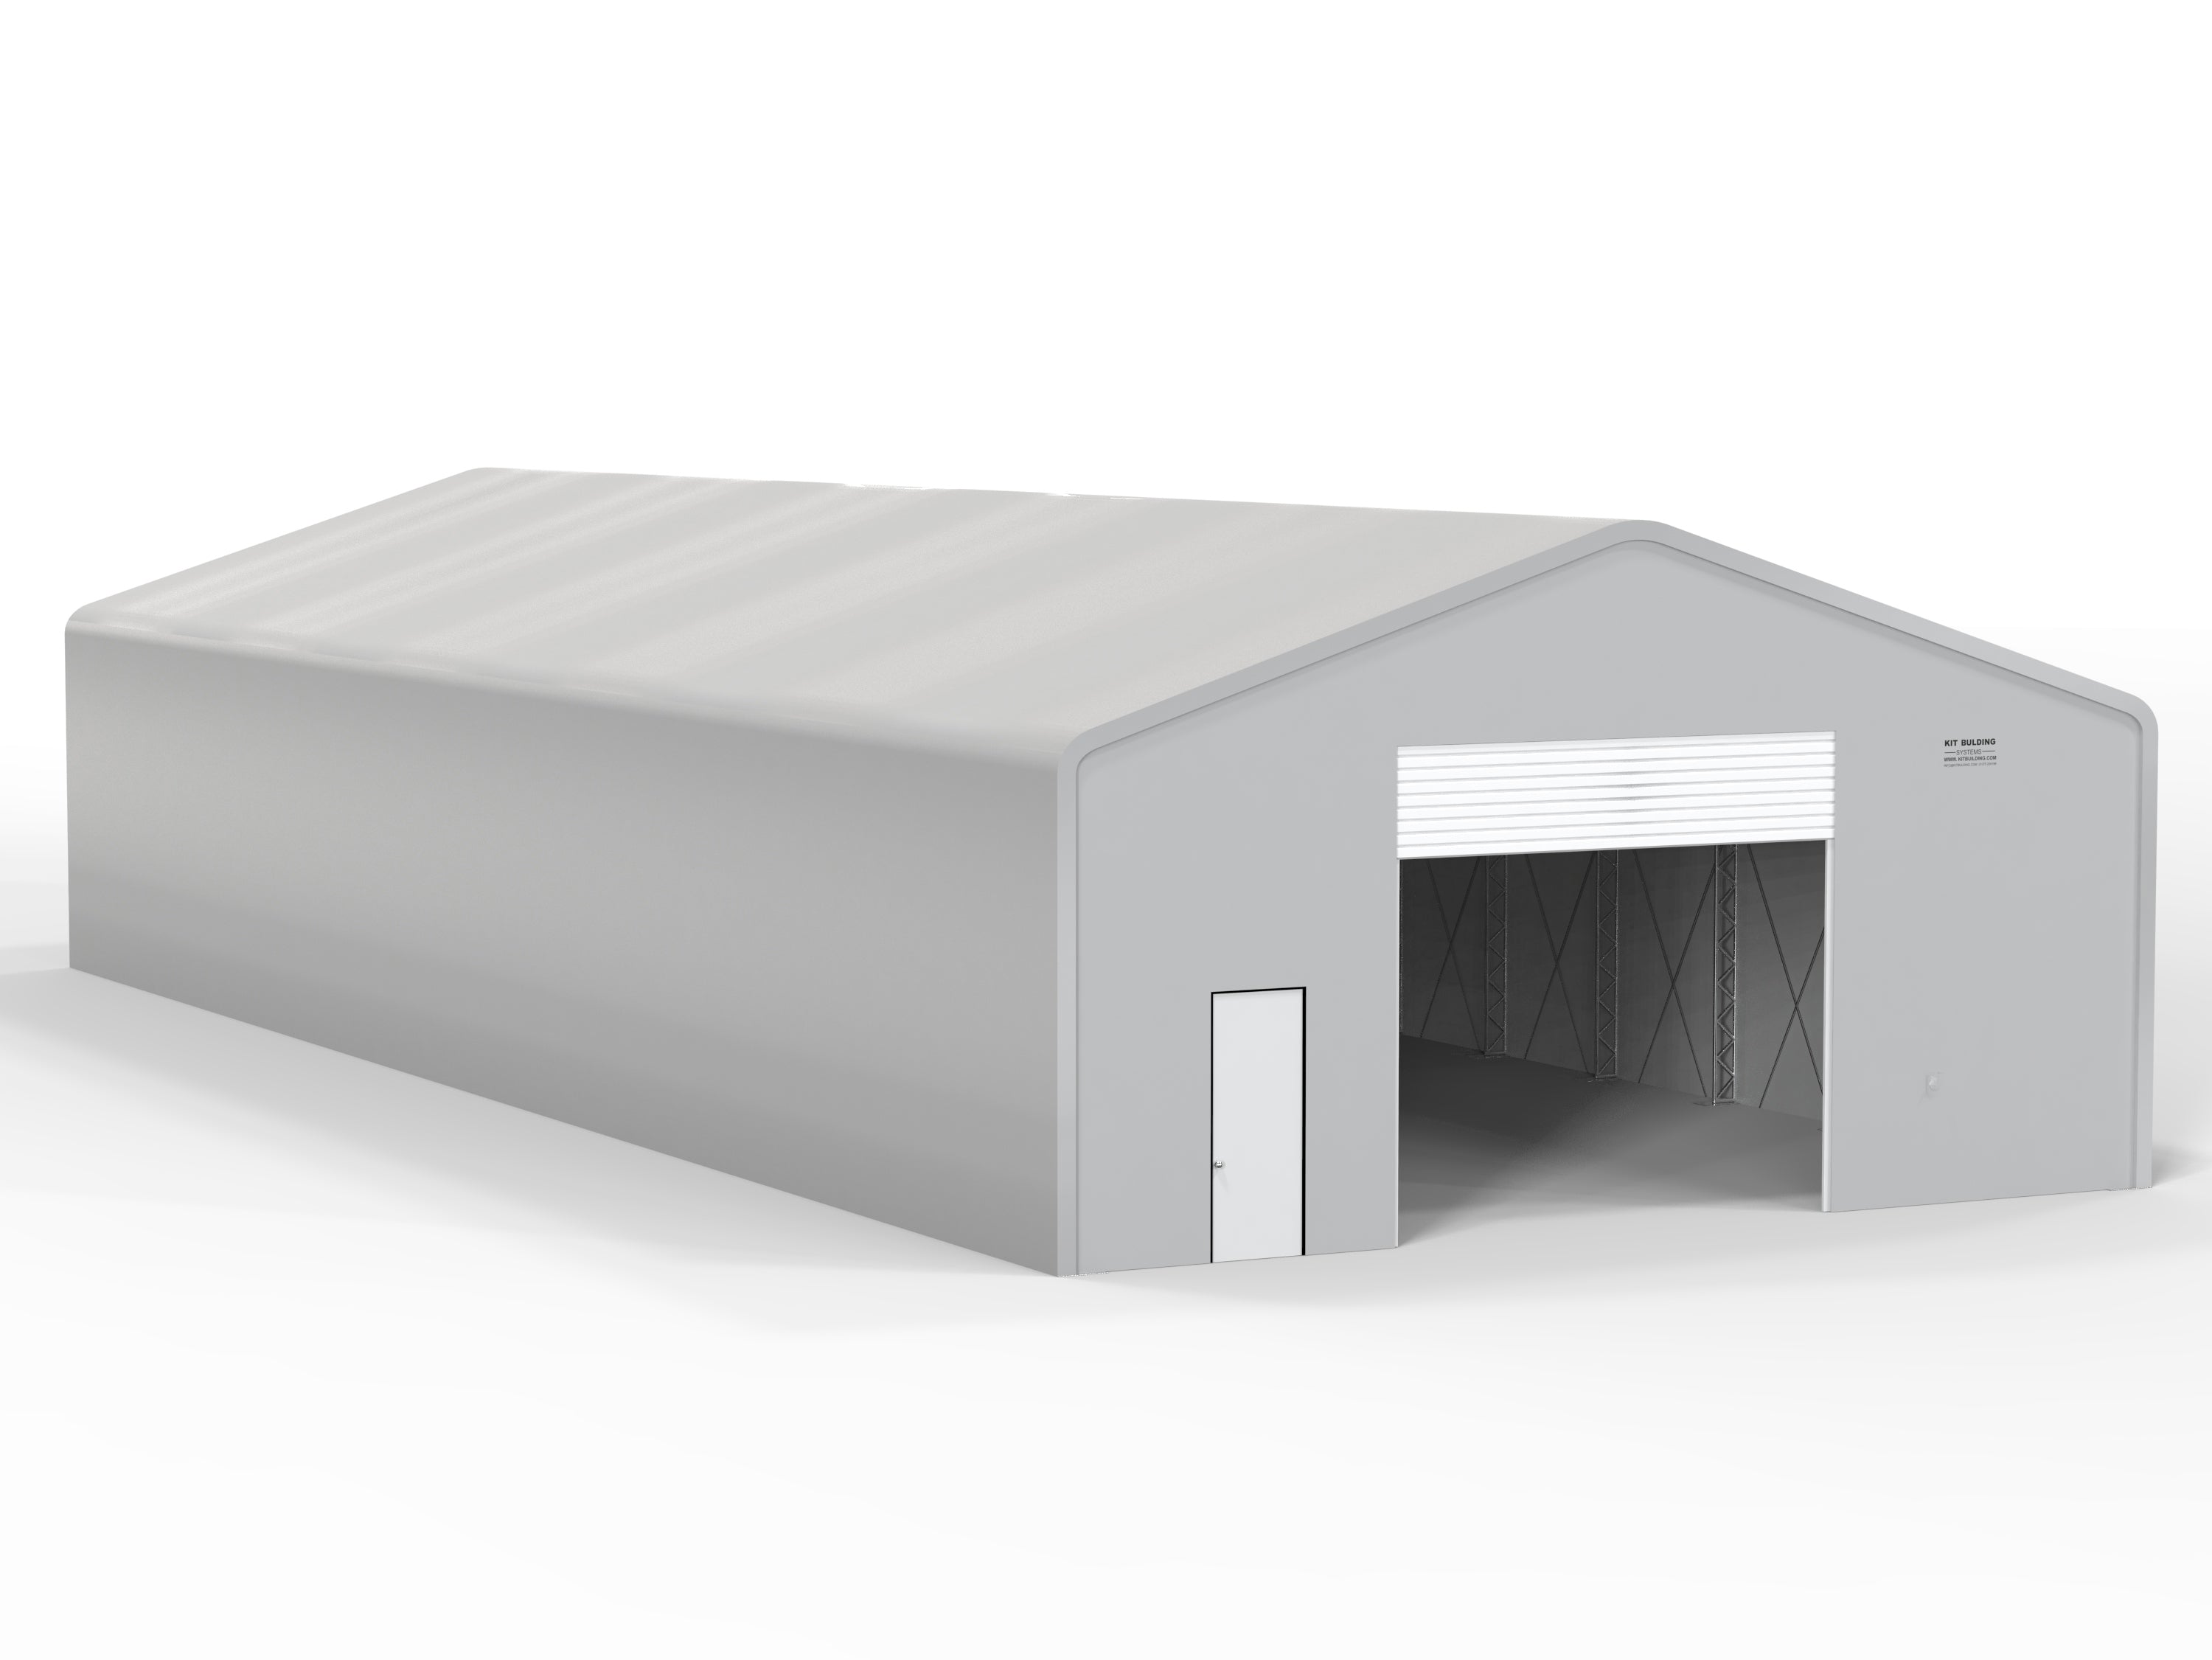 Double Truss PVC temporary storage building - Grey - Automatic Shutter